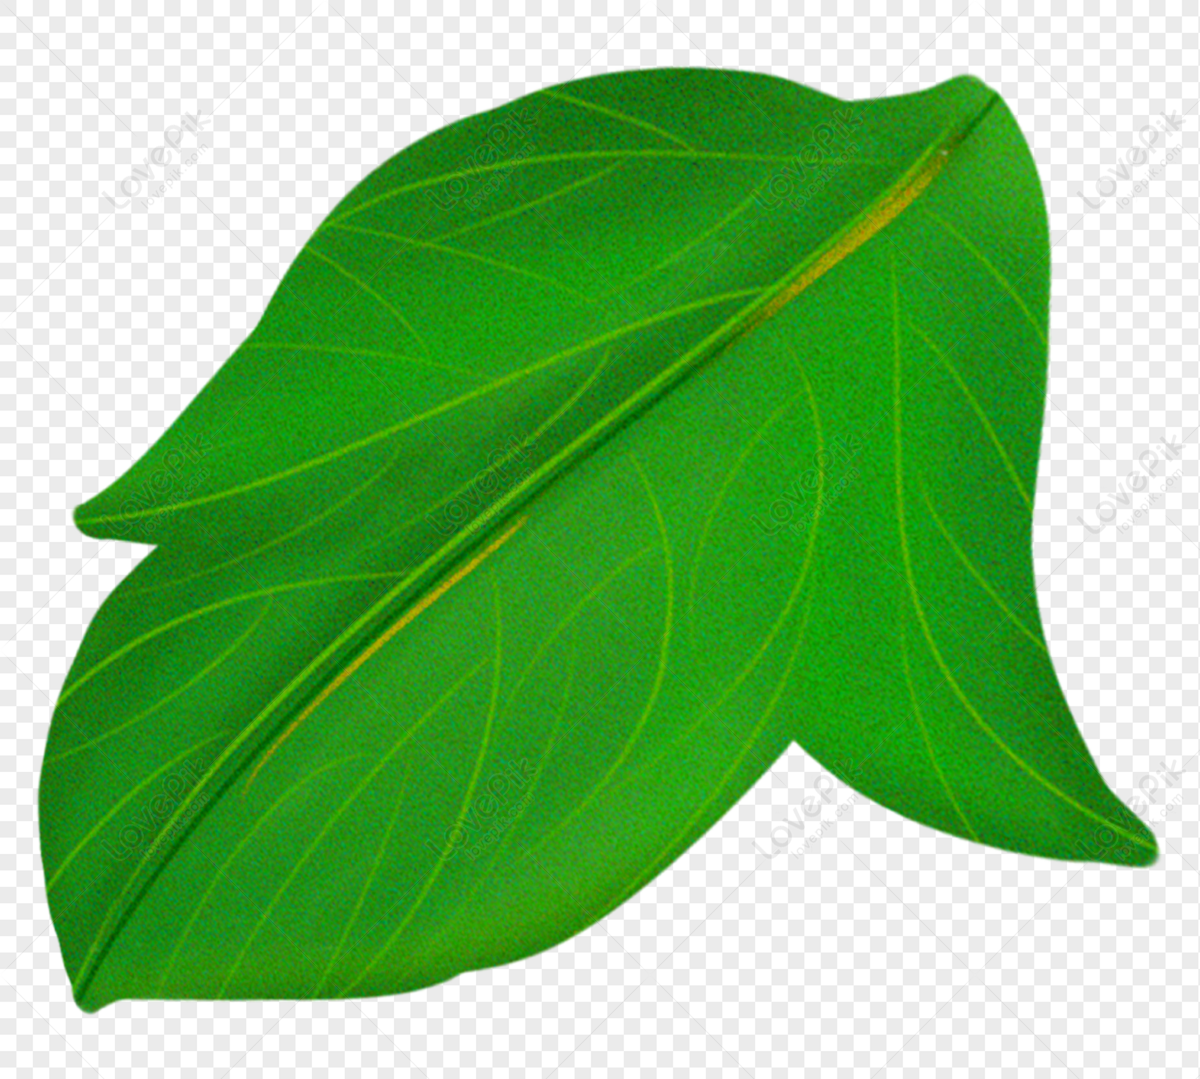 Cartoon Leaves Decoration Png Free PNG And Clipart Image For Free ...